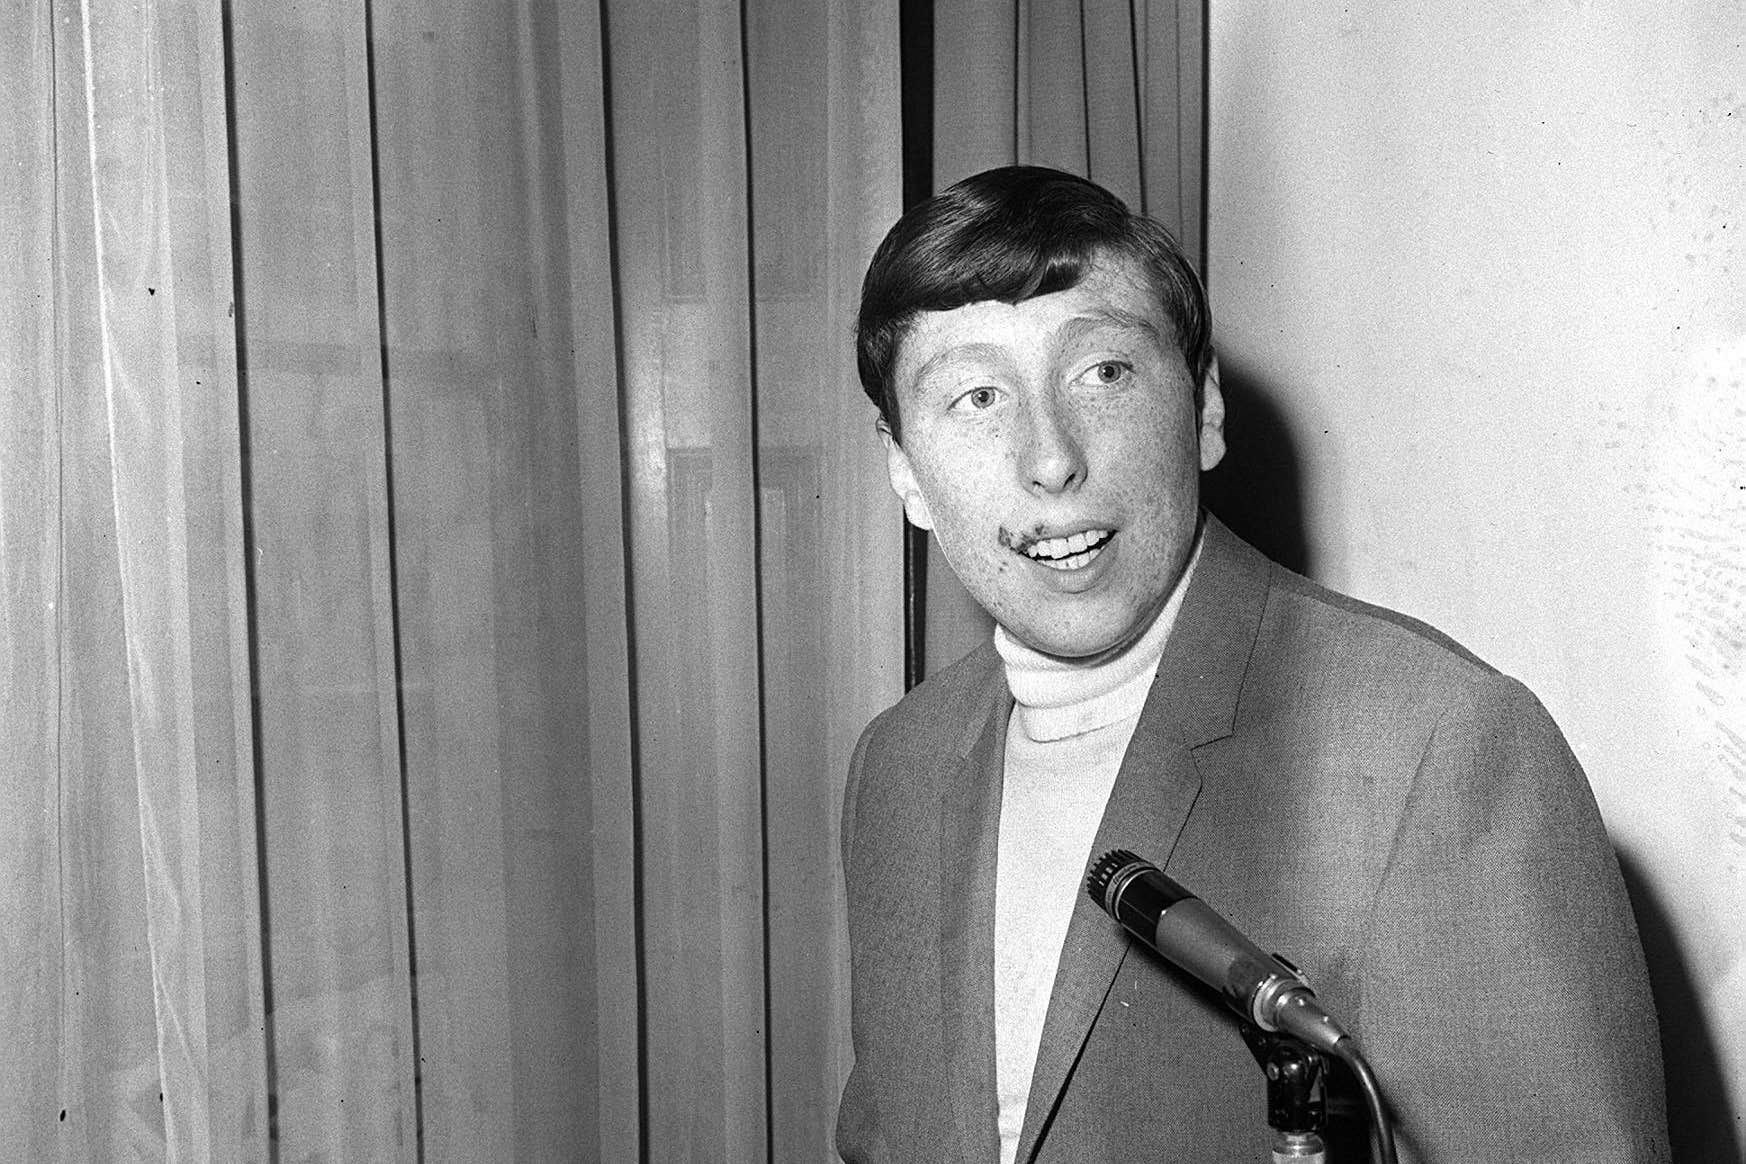 Singer who topped charts on day England won 1966 World Cup ...